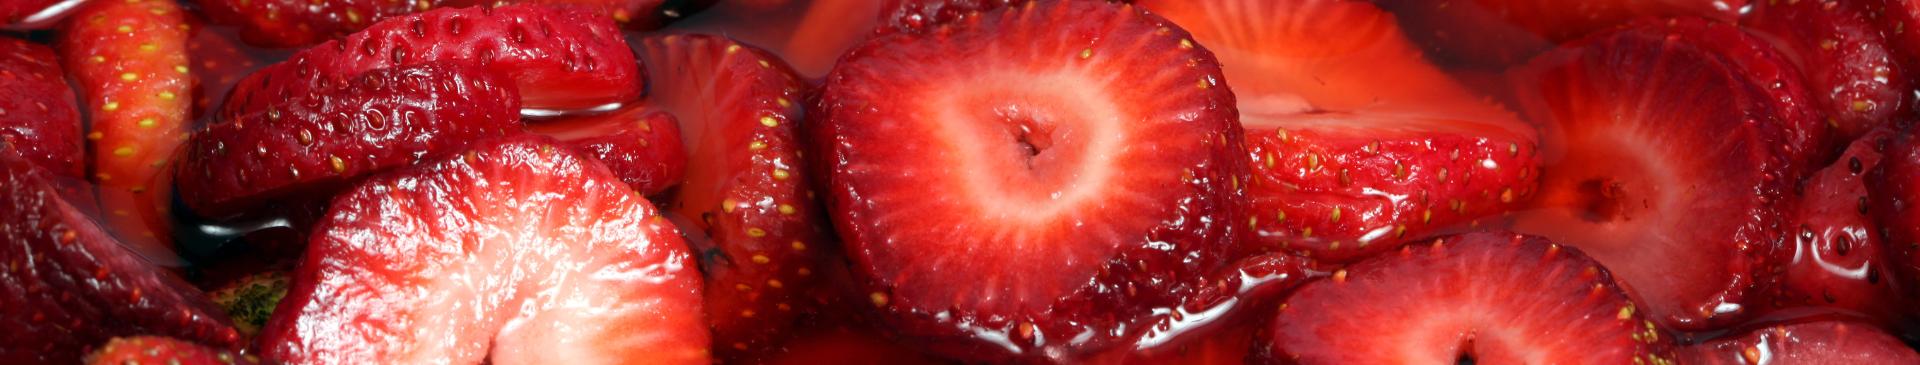 Clever Ways To Use Up All Those Strawberries In The Kitchen